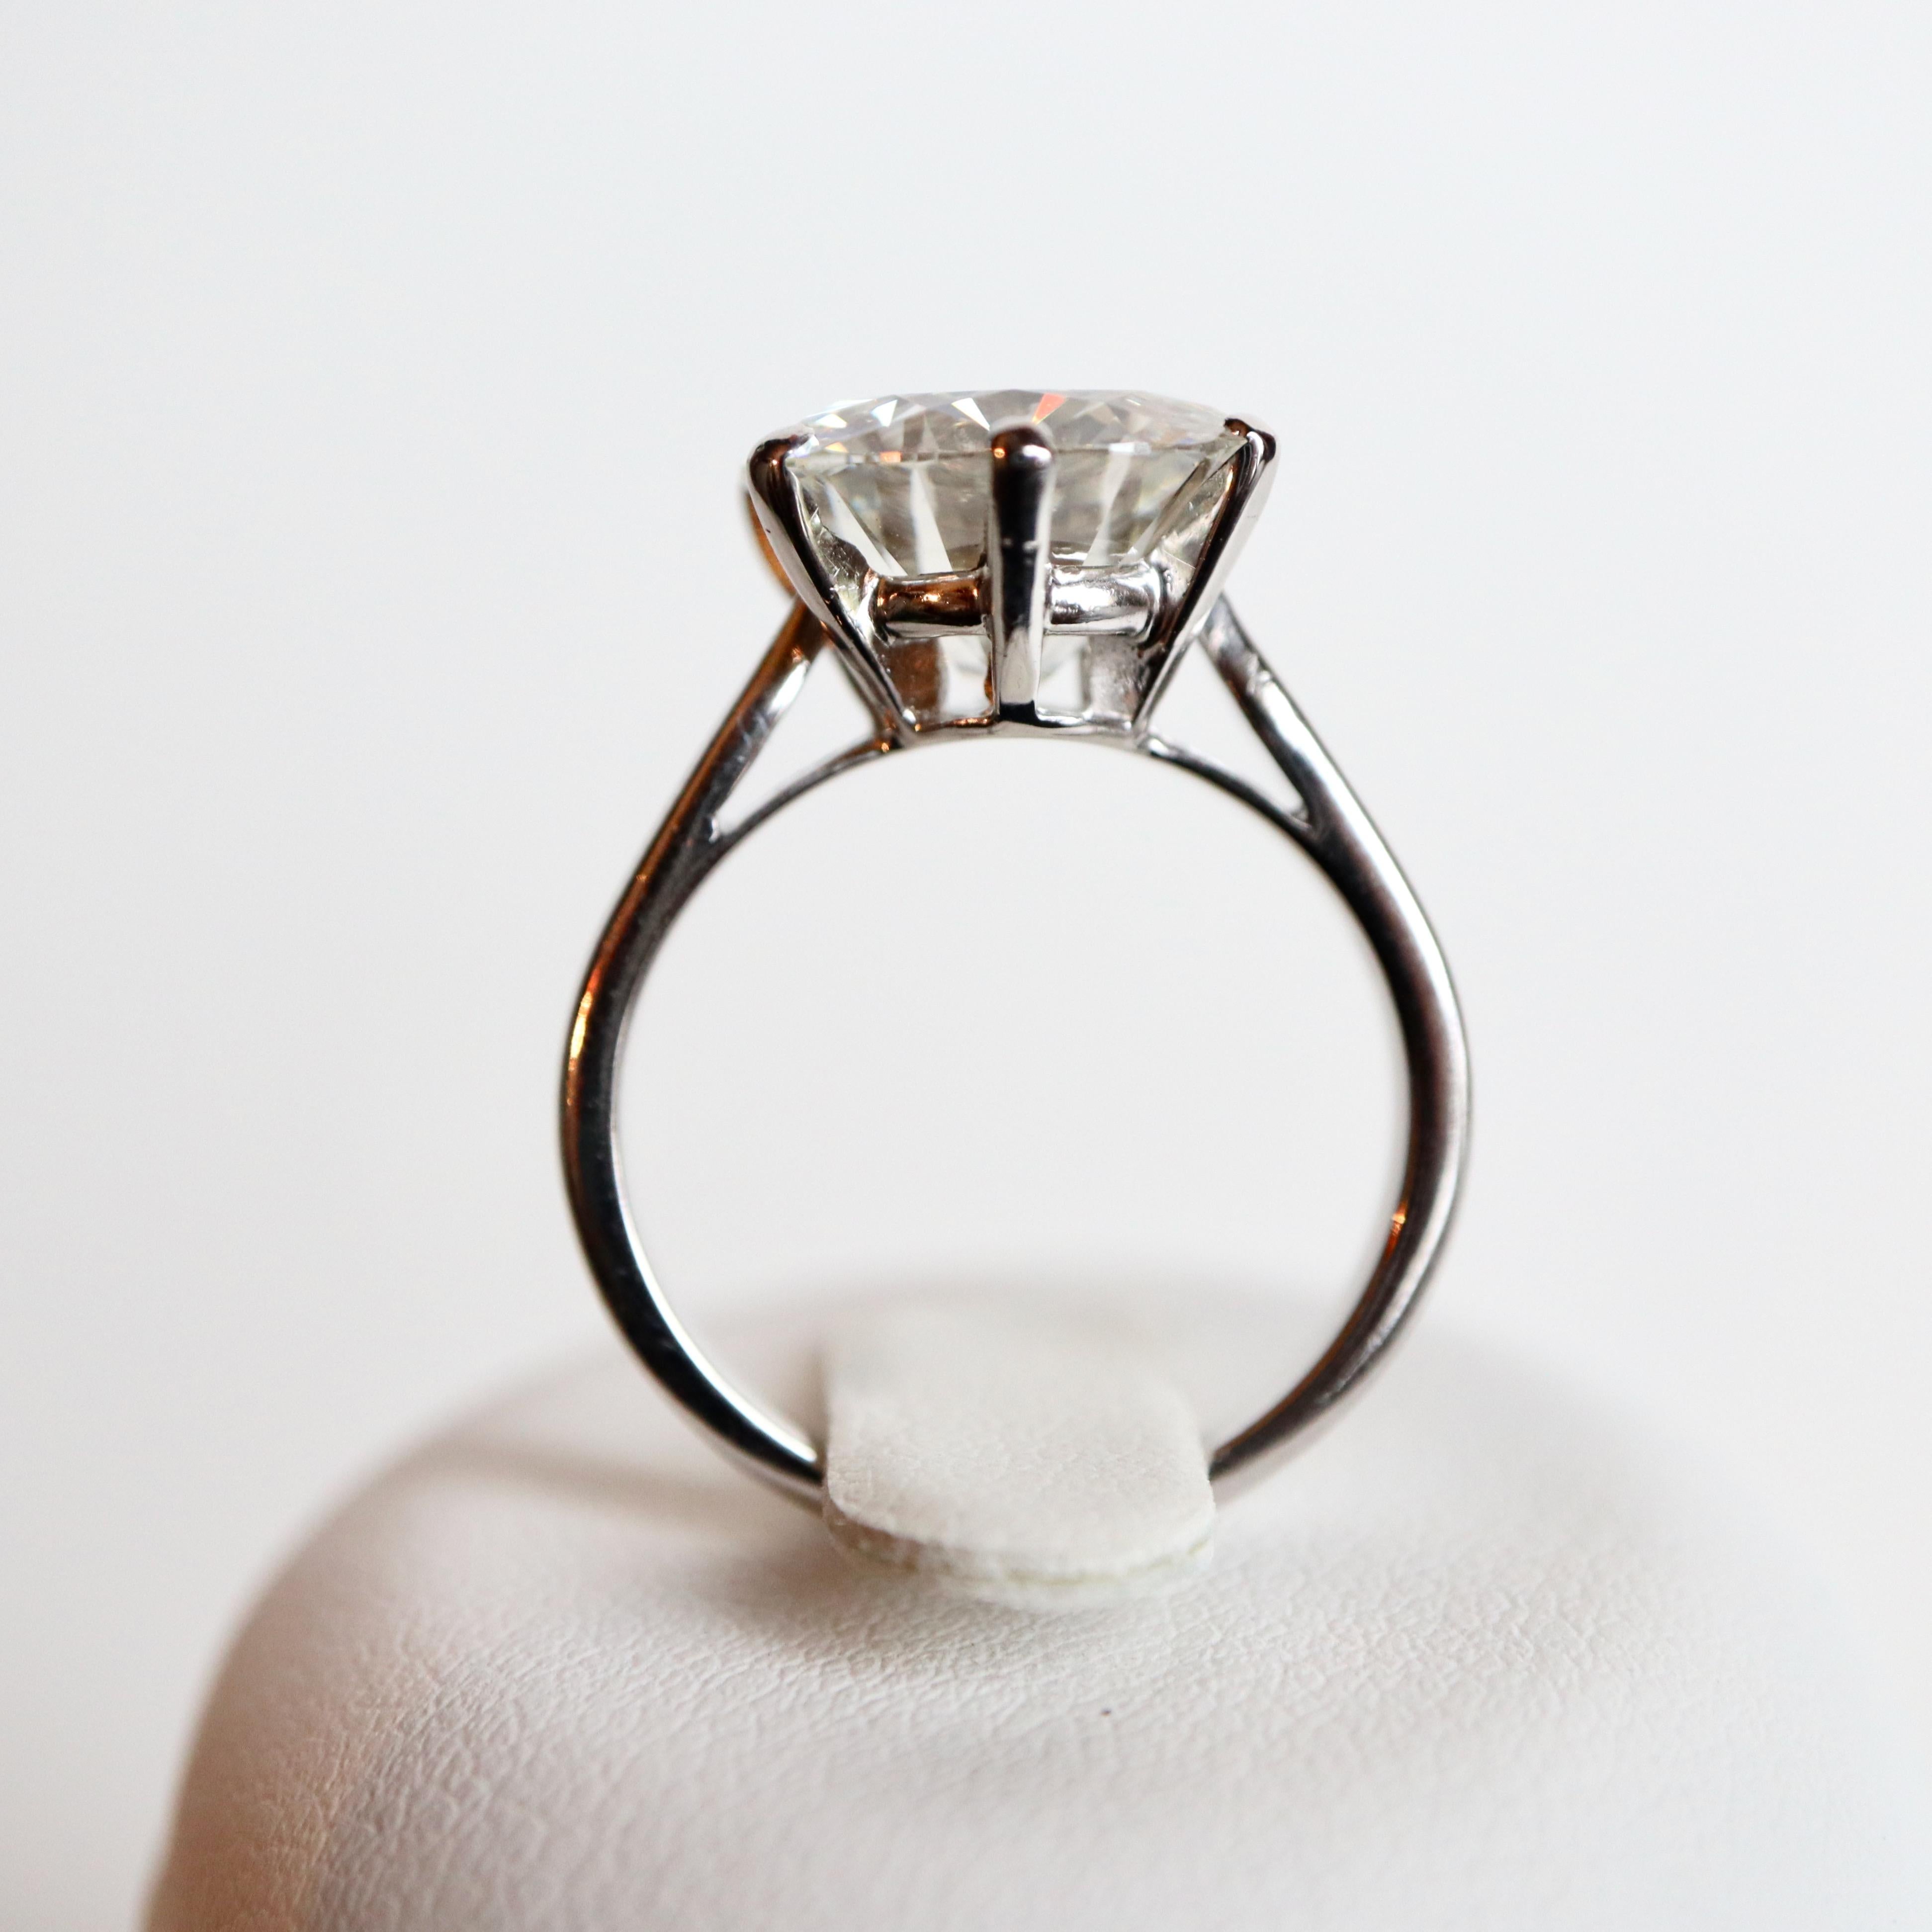 Brilliant Cut Solitaire Ring with a 5.23 Carat Diamond in the Center For Sale